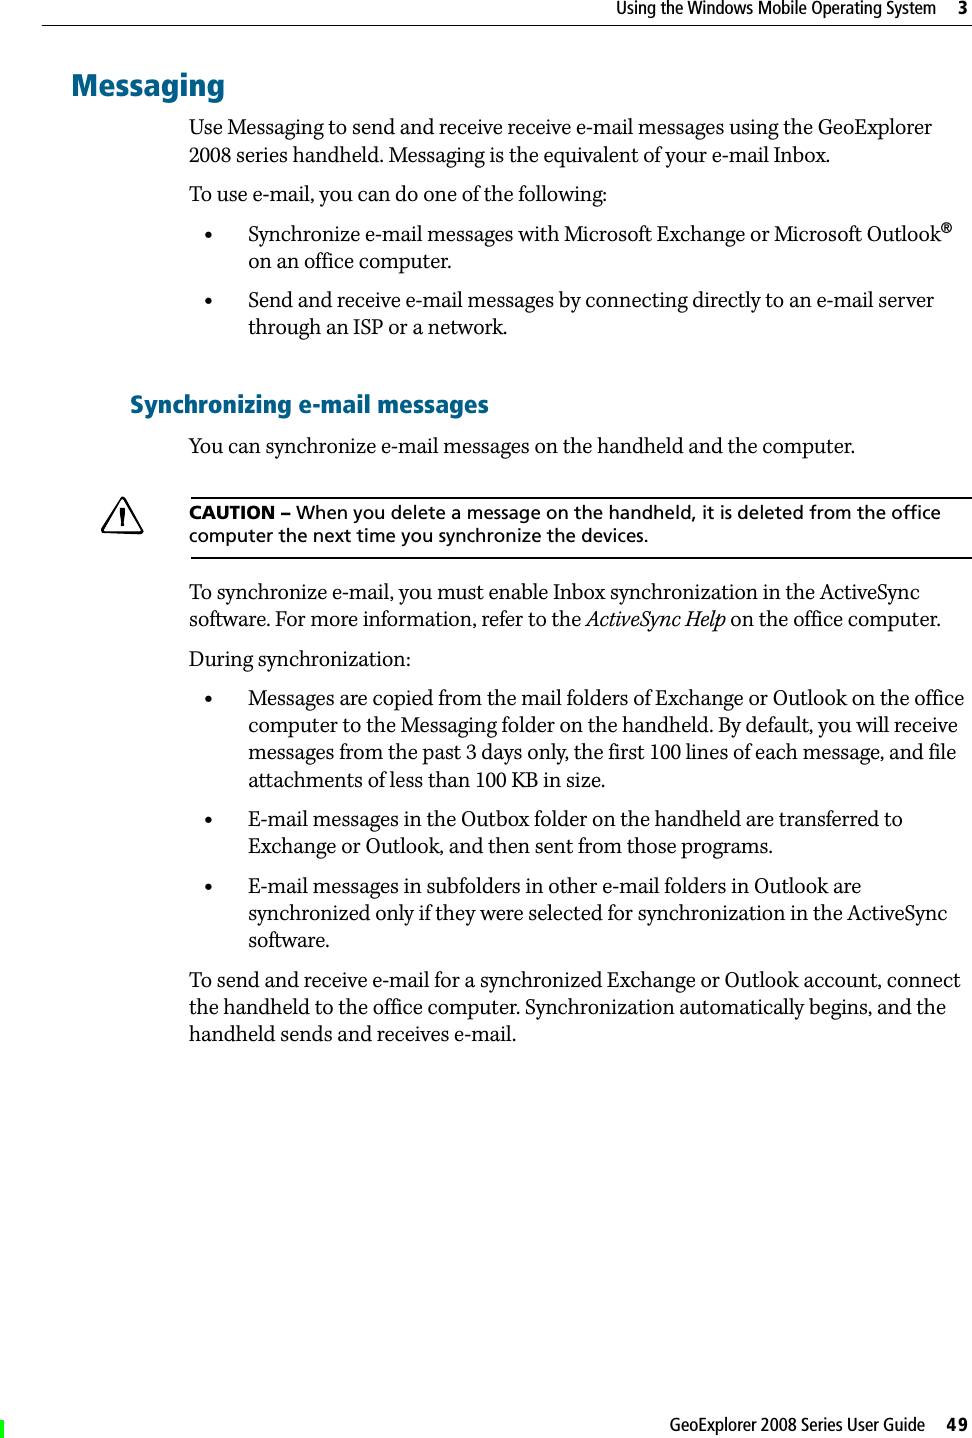 GeoExplorer 2008 Series User Guide     49Using the Windows Mobile Operating System     3MessagingUse Messaging to send and receive receive e-mail messages using the GeoExplorer 2008 series handheld. Messaging is the equivalent of your e-mail Inbox. To use e-mail, you can do one of the following:•Synchronize e-mail messages with Microsoft Exchange or Microsoft Outlook® on an office computer.•Send and receive e-mail messages by connecting directly to an e-mail server through an ISP or a network.Synchronizing e-mail messagesYou can synchronize e-mail messages on the handheld and the computer. CCAUTION – When you delete a message on the handheld, it is deleted from the office computer the next time you synchronize the devices.To synchronize e-mail, you must enable Inbox synchronization in the ActiveSync software. For more information, refer to the ActiveSync Help on the office computer.During synchronization:•Messages are copied from the mail folders of Exchange or Outlook on the office computer to the Messaging folder on the handheld. By default, you will receive messages from the past 3 days only, the first 100 lines of each message, and file attachments of less than 100 KB in size.•E-mail messages in the Outbox folder on the handheld are transferred to Exchange or Outlook, and then sent from those programs.•E-mail messages in subfolders in other e-mail folders in Outlook are synchronized only if they were selected for synchronization in the ActiveSync software. To send and receive e-mail for a synchronized Exchange or Outlook account, connect the handheld to the office computer. Synchronization automatically begins, and the handheld sends and receives e-mail.